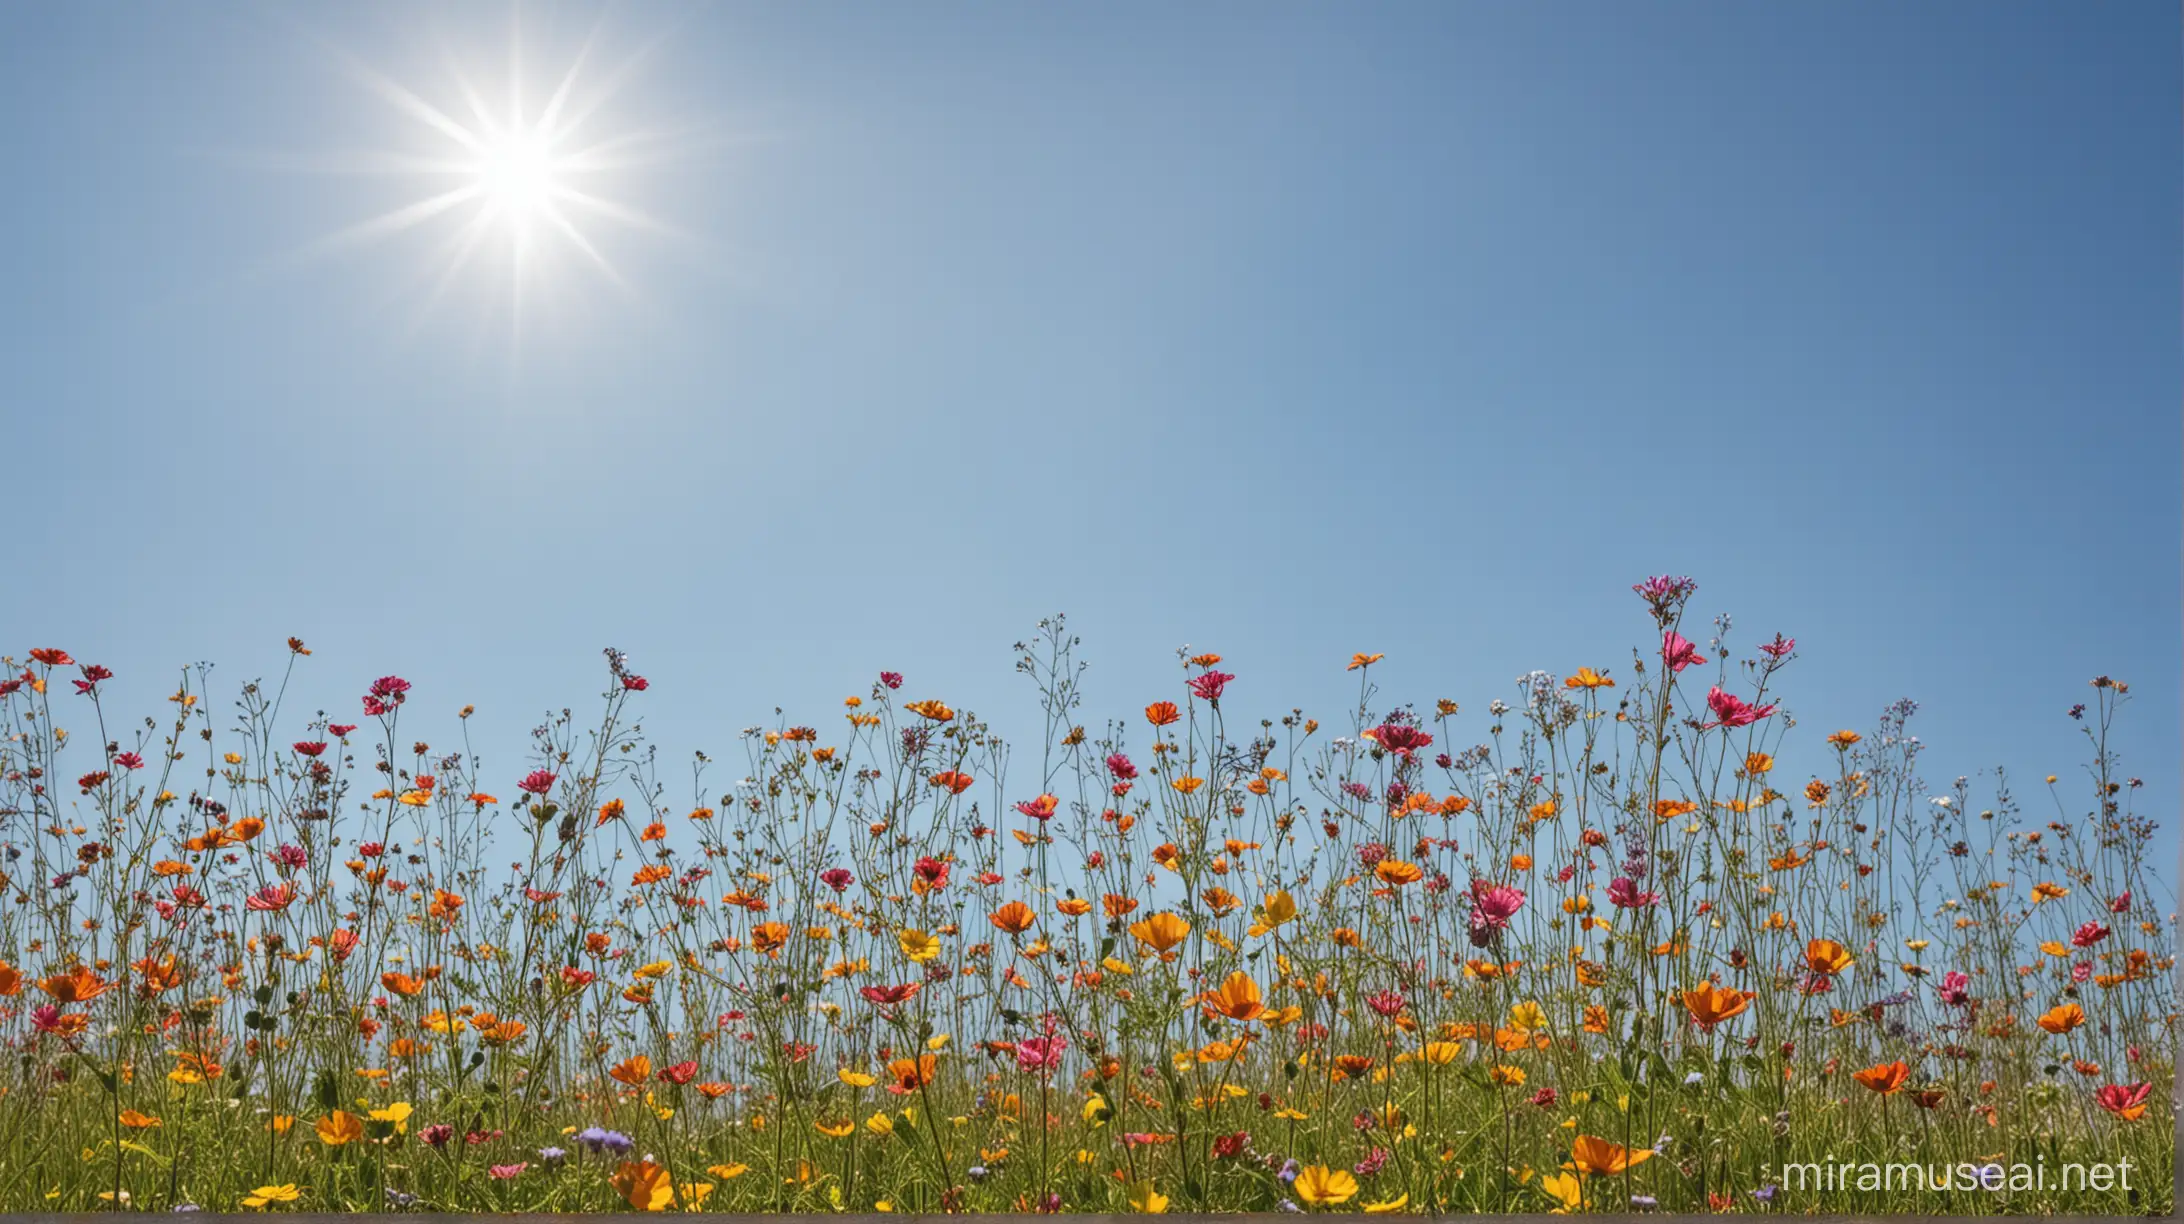 Vibrant Wildflowers Blossoming under a Sunny Blue Sky